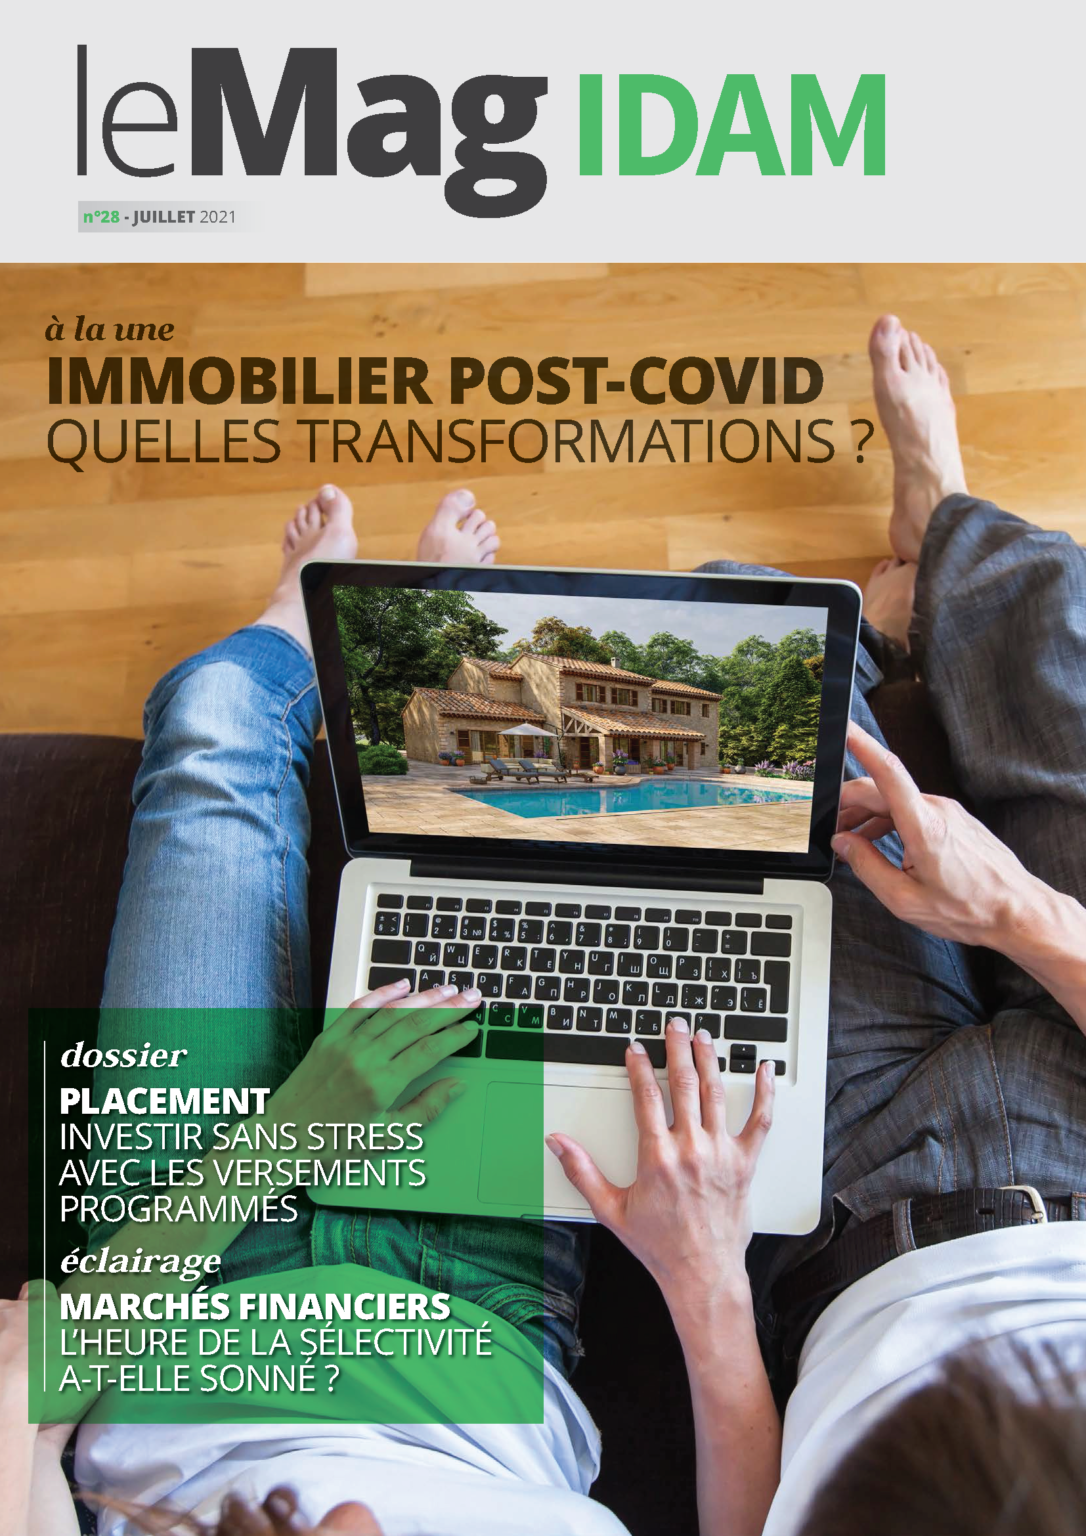 IDAM-mag48-juill2021 couverture-1086x1536